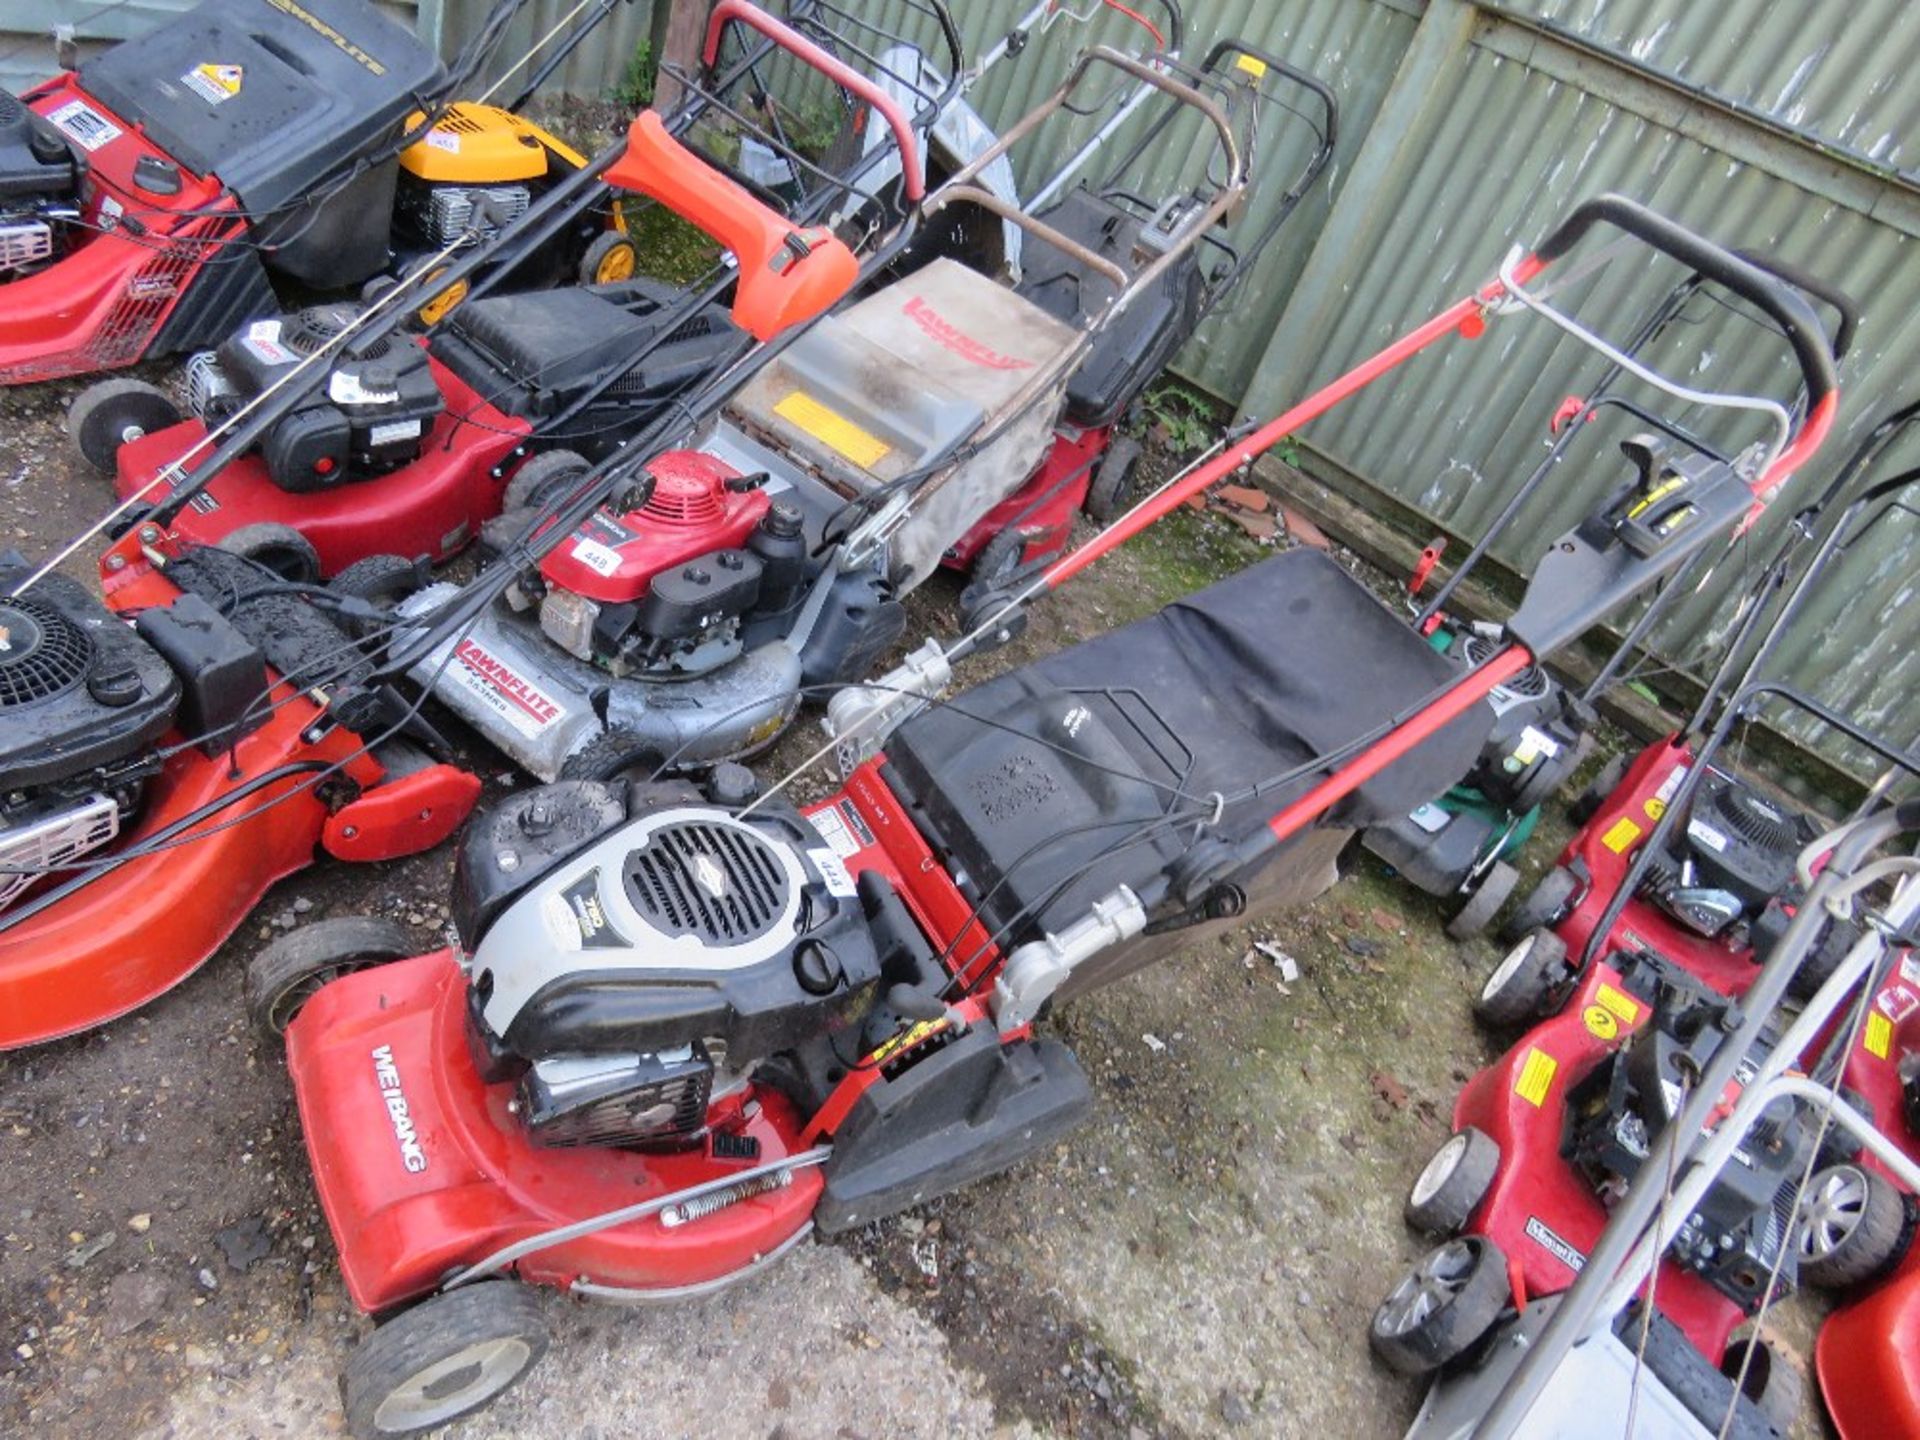 WEIBANG LEGACY 48V ROLLER MOWER WITH COLLECTOR. DIRECT FROM LOCAL LANDSCAPE COMPANY WHO ARE CLOSING - Image 2 of 4